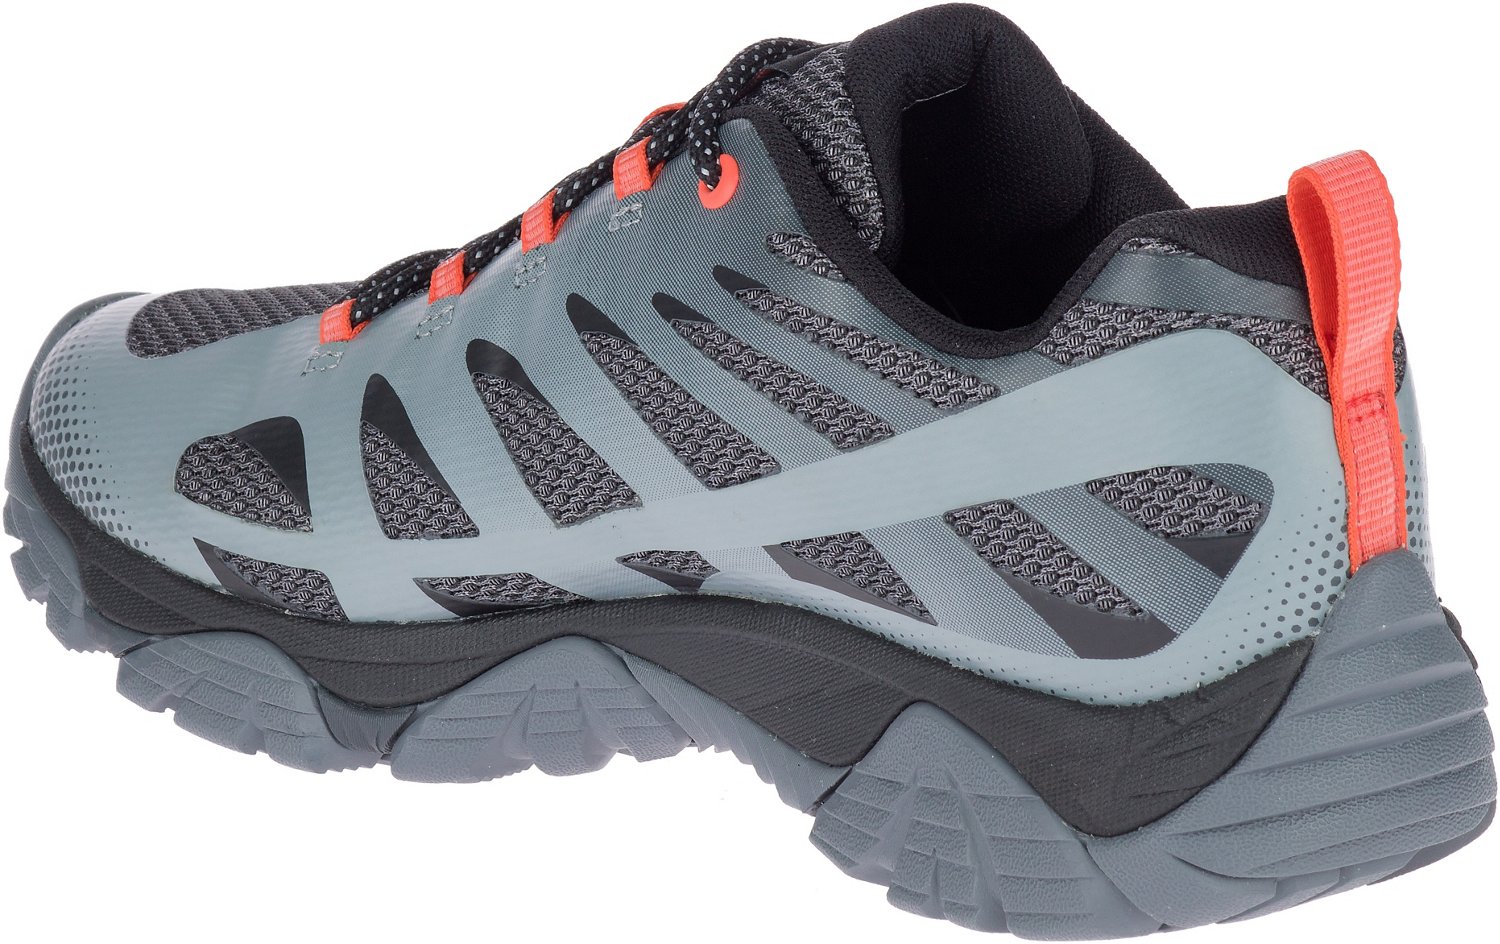 Merrell Men's Moab Edge 2 Hiking Shoes | Free Shipping at Academy